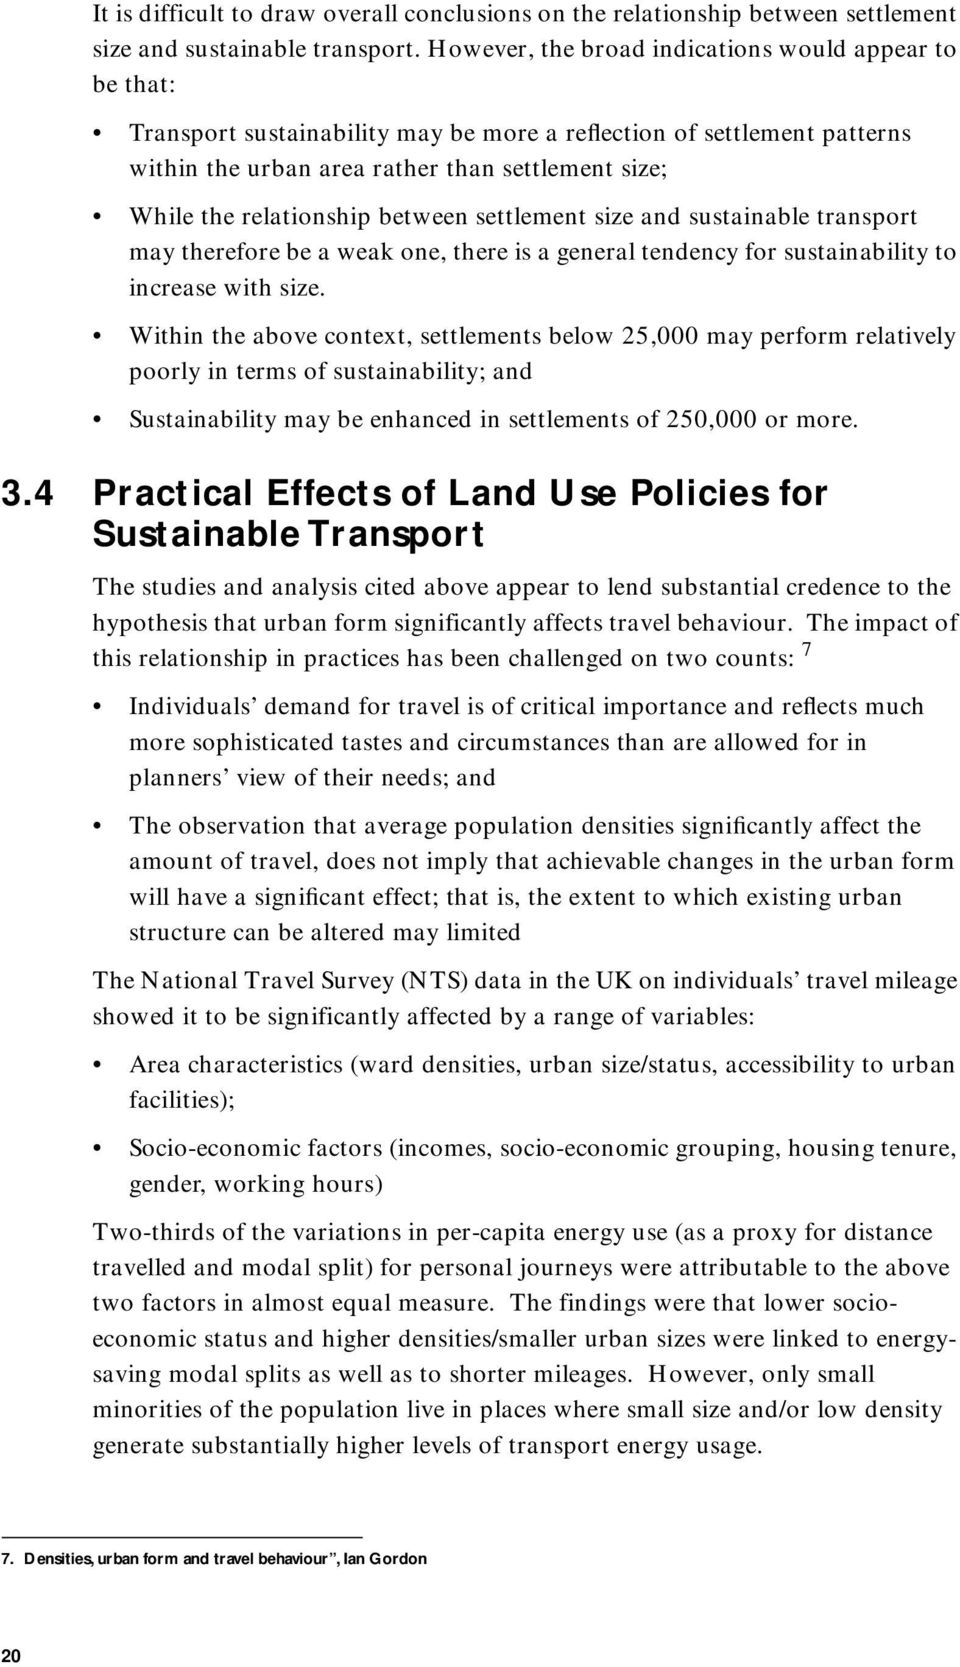 relationship between settlement size and sustainable transport may therefore be a weak one, there is a general tendency for sustainability to increase with size.